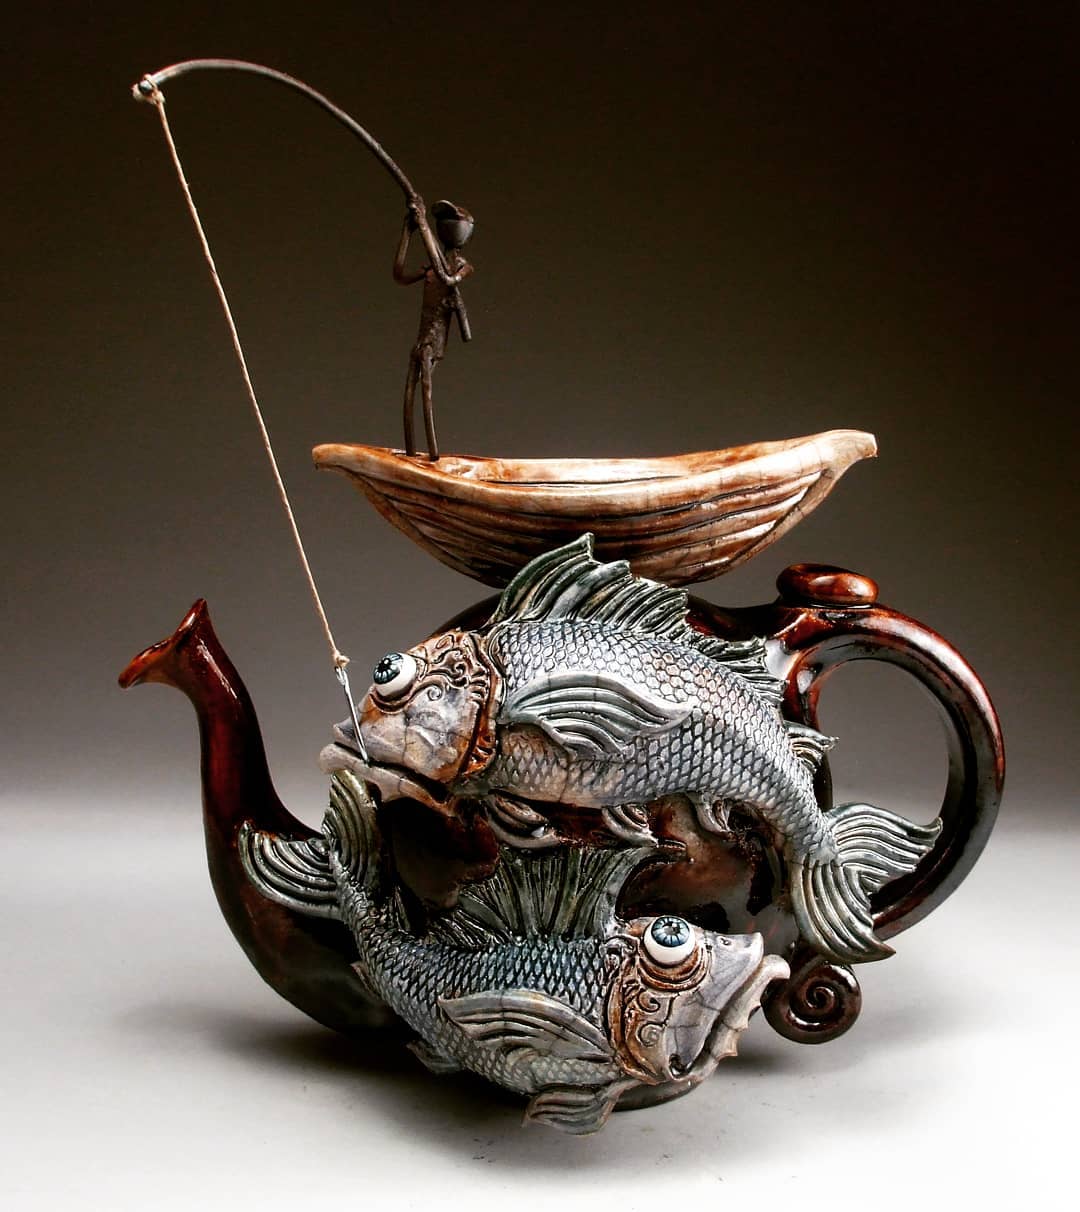 Ceramic Fairytales, Intricate Sculptures, Teapots, And Mugs By Mitchell Grafton (6)